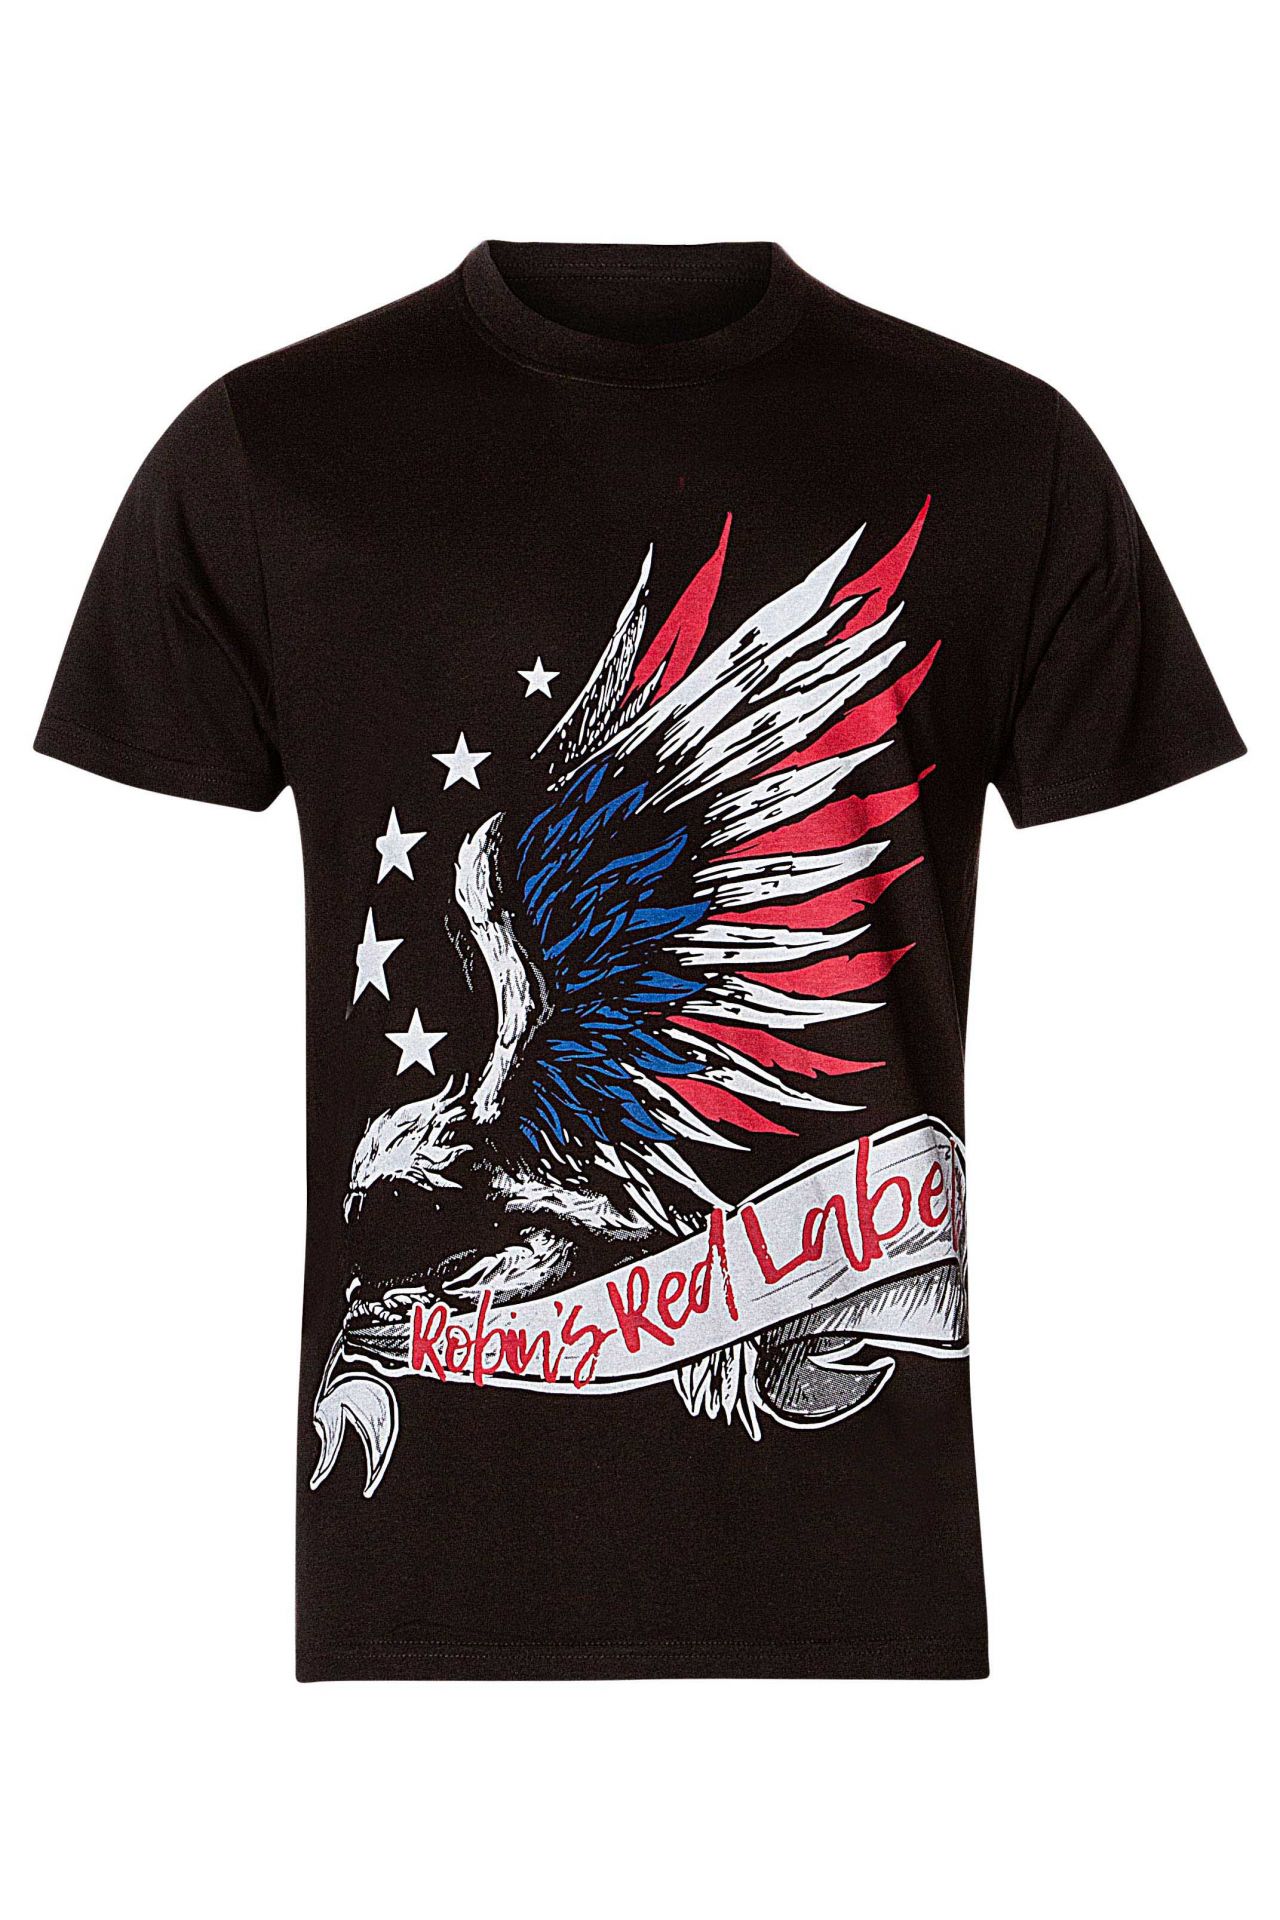 ROBIN'S RED LABEL AMERICAN EAGLE TEE IN BLACK